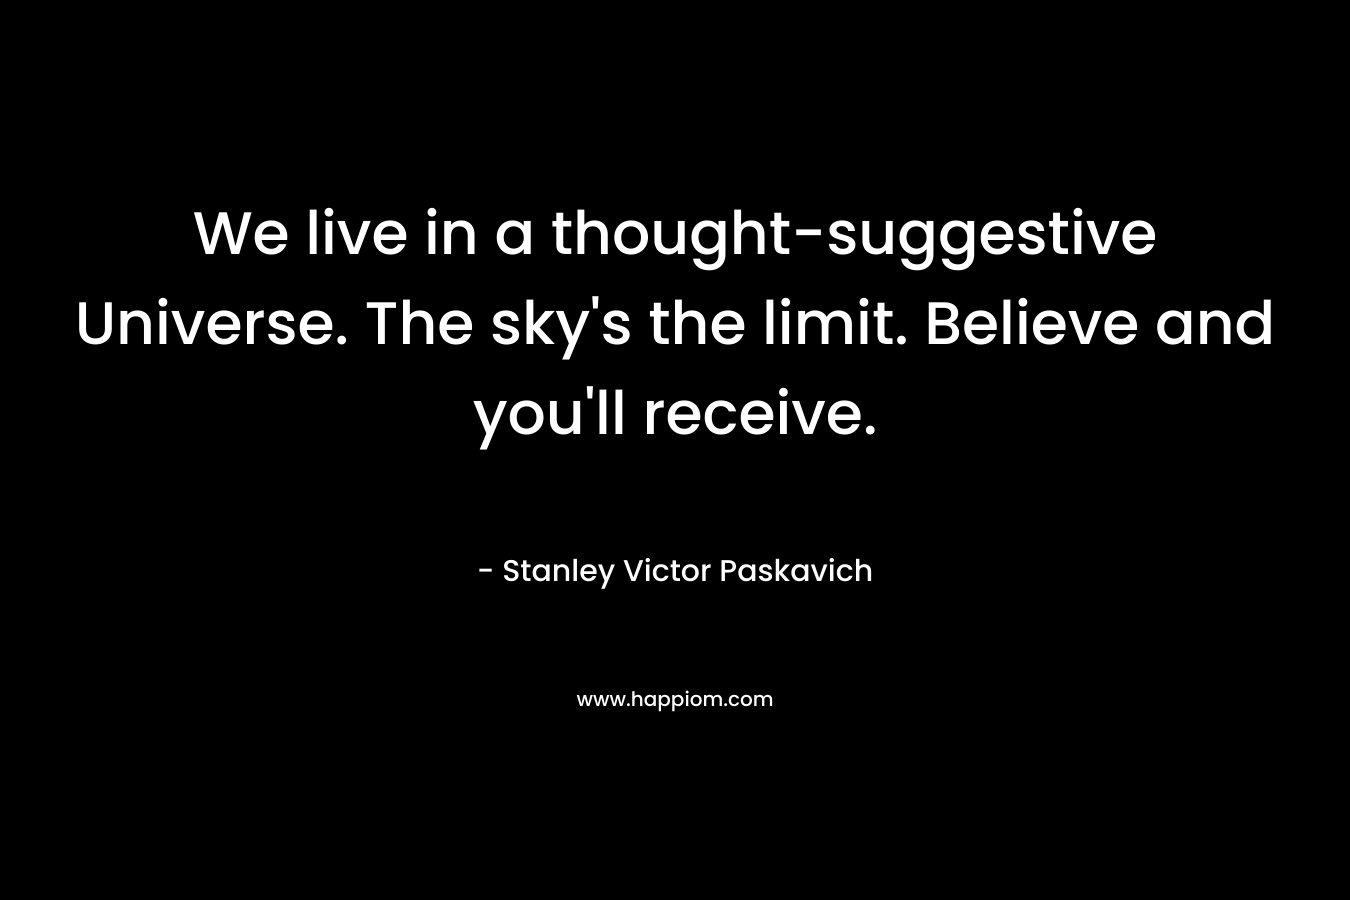 We live in a thought-suggestive Universe. The sky’s the limit. Believe and you’ll receive. – Stanley Victor Paskavich